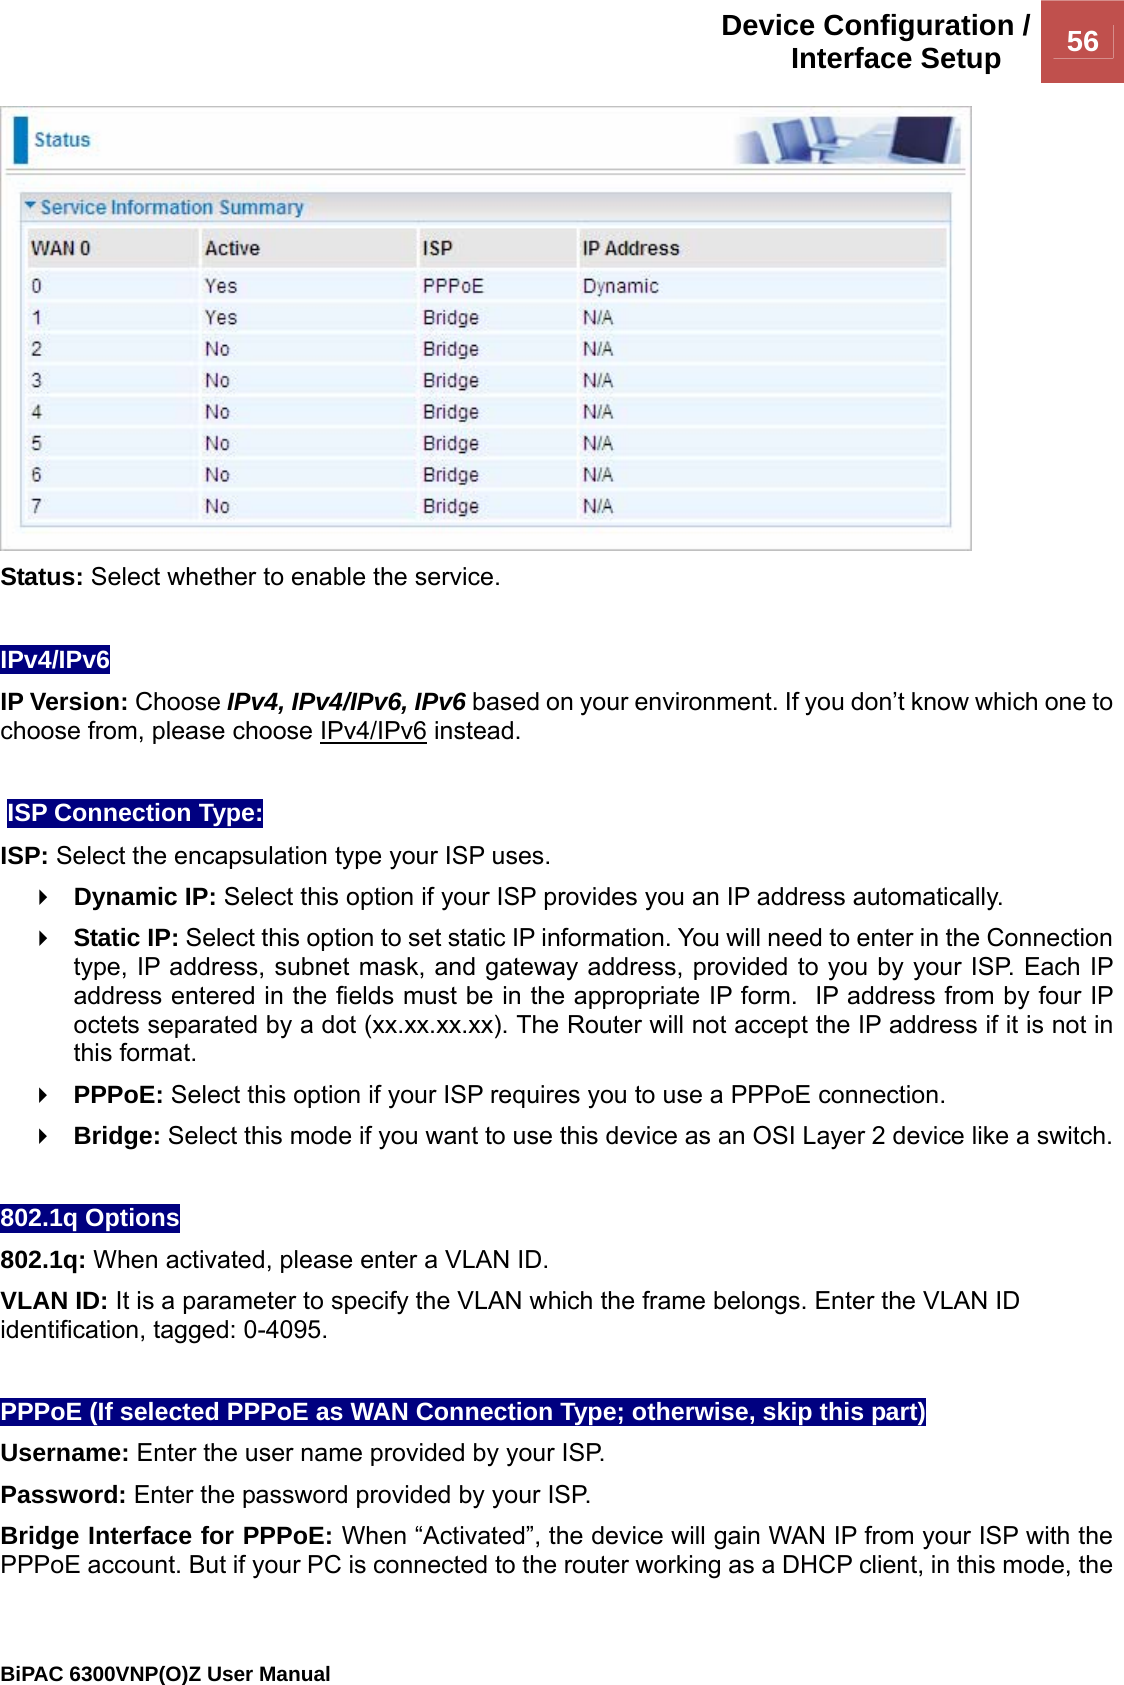 Device Configuration /Interface Setup  56                                                BiPAC 6300VNP(O)Z User Manual   Status: Select whether to enable the service.  IPv4/IPv6 IP Version: Choose IPv4, IPv4/IPv6, IPv6 based on your environment. If you don’t know which one to choose from, please choose IPv4/IPv6 instead.   ISP Connection Type:  ISP: Select the encapsulation type your ISP uses.   Dynamic IP: Select this option if your ISP provides you an IP address automatically.   Static IP: Select this option to set static IP information. You will need to enter in the Connection type, IP address, subnet mask, and gateway address, provided to you by your ISP. Each IP address entered in the fields must be in the appropriate IP form.  IP address from by four IP octets separated by a dot (xx.xx.xx.xx). The Router will not accept the IP address if it is not in this format.  PPPoE: Select this option if your ISP requires you to use a PPPoE connection.   Bridge: Select this mode if you want to use this device as an OSI Layer 2 device like a switch.  802.1q Options 802.1q: When activated, please enter a VLAN ID.  VLAN ID: It is a parameter to specify the VLAN which the frame belongs. Enter the VLAN ID identification, tagged: 0-4095.  PPPoE (If selected PPPoE as WAN Connection Type; otherwise, skip this part)  Username: Enter the user name provided by your ISP.  Password: Enter the password provided by your ISP. Bridge Interface for PPPoE: When “Activated”, the device will gain WAN IP from your ISP with the PPPoE account. But if your PC is connected to the router working as a DHCP client, in this mode, the 